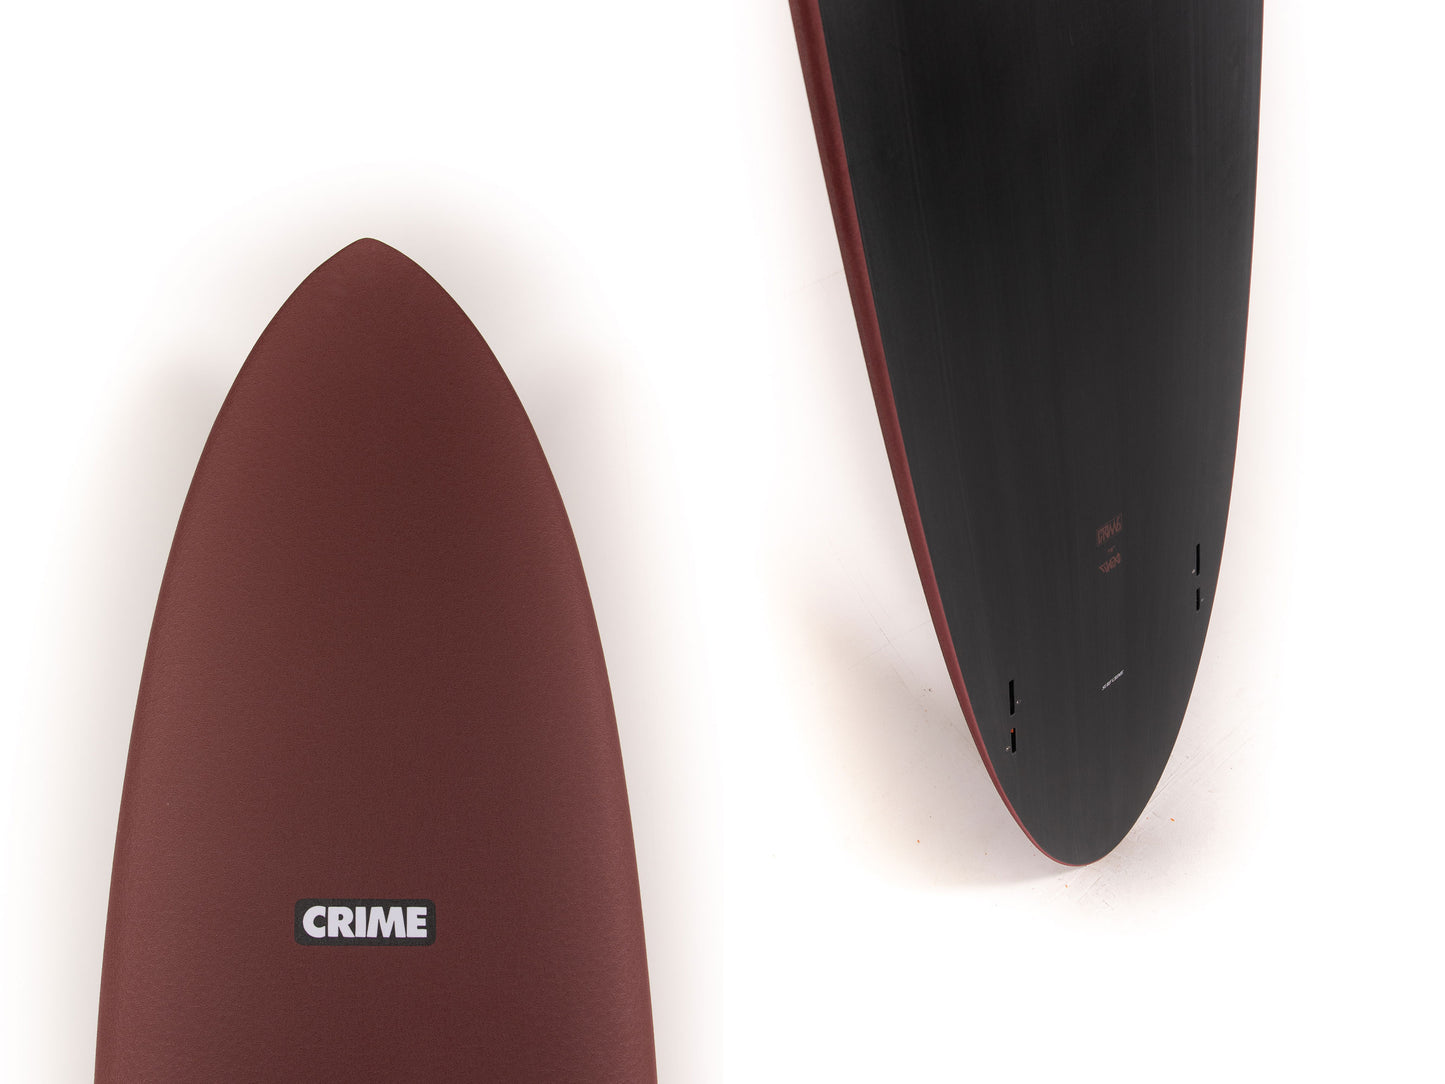 
                  
                    Crime Surfboards - MID TWIN - 7'6" x 22.25" x 2.8" - 51.5L
                  
                